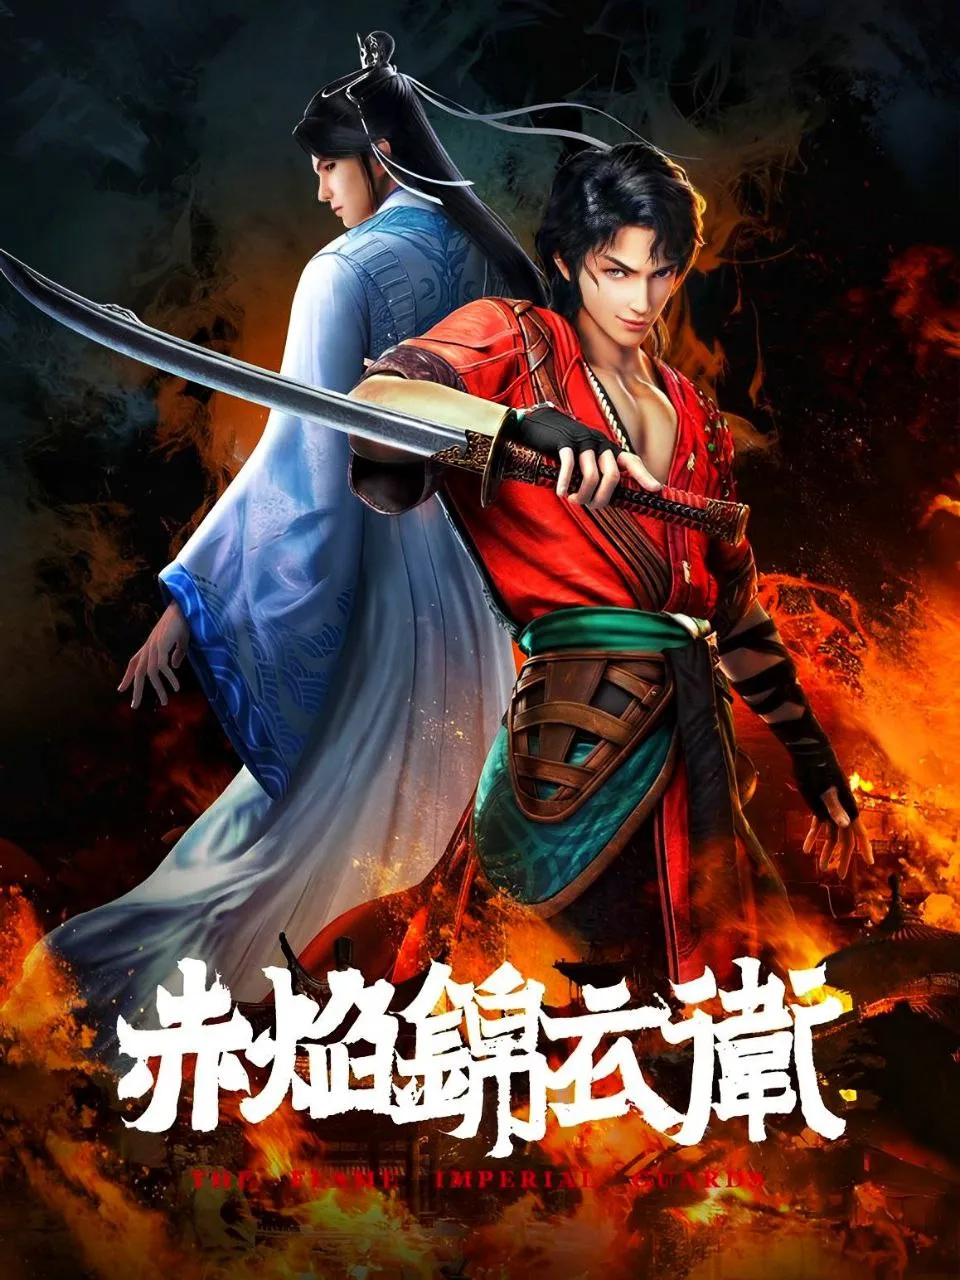 The Flame Imperial Guards Episode 20 English Sub